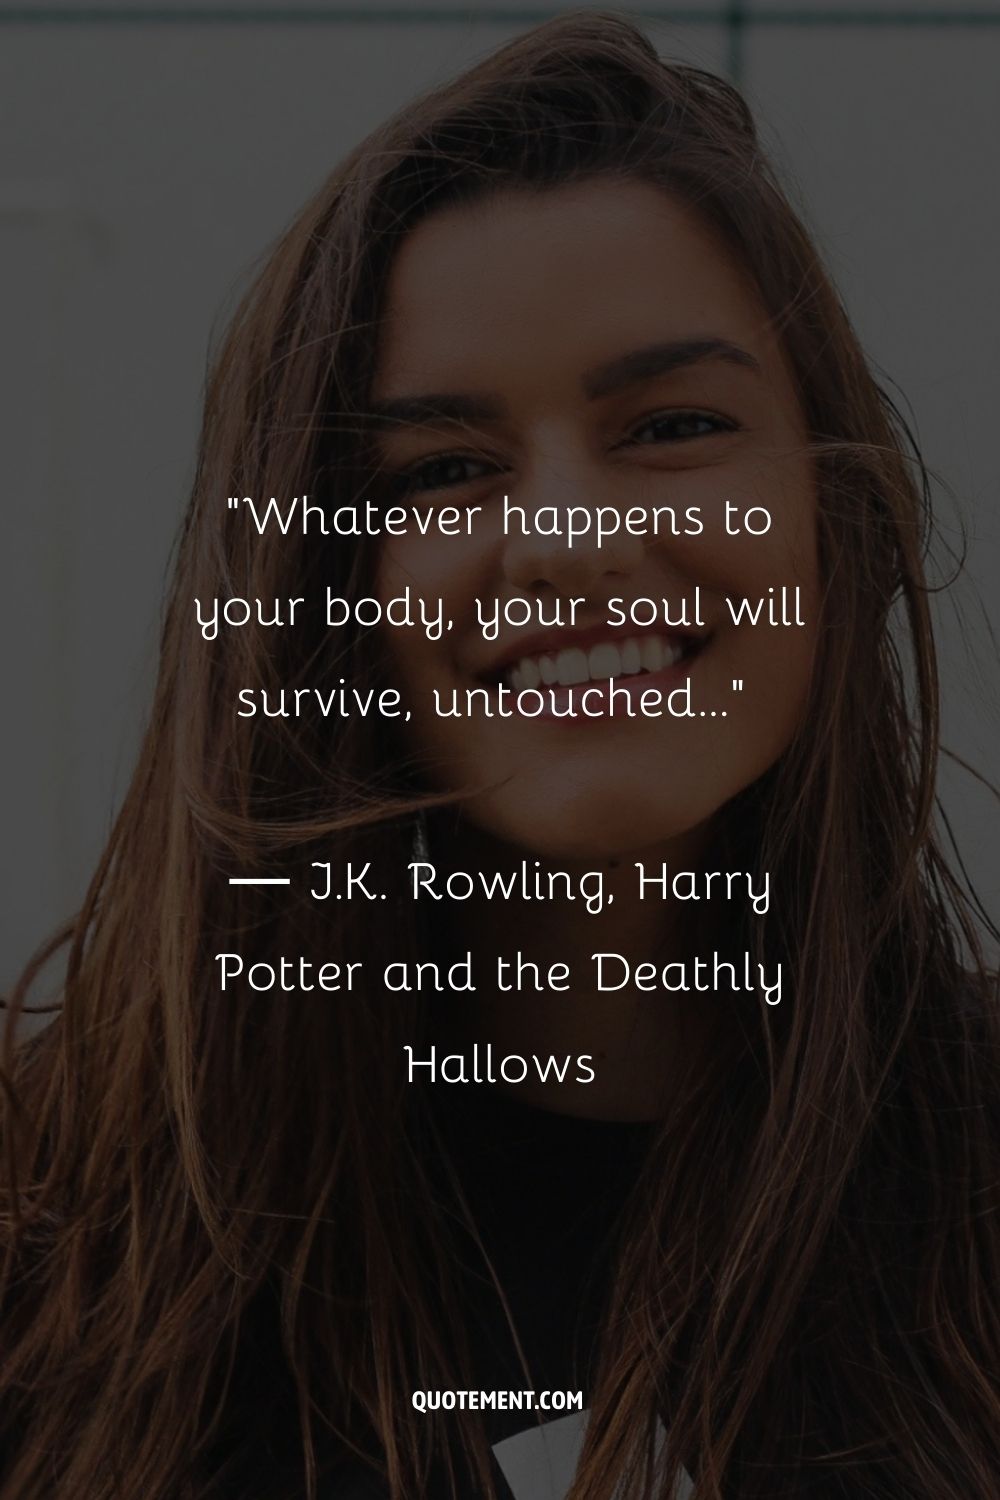 Whatever happens to your body, your soul will survive, untouched